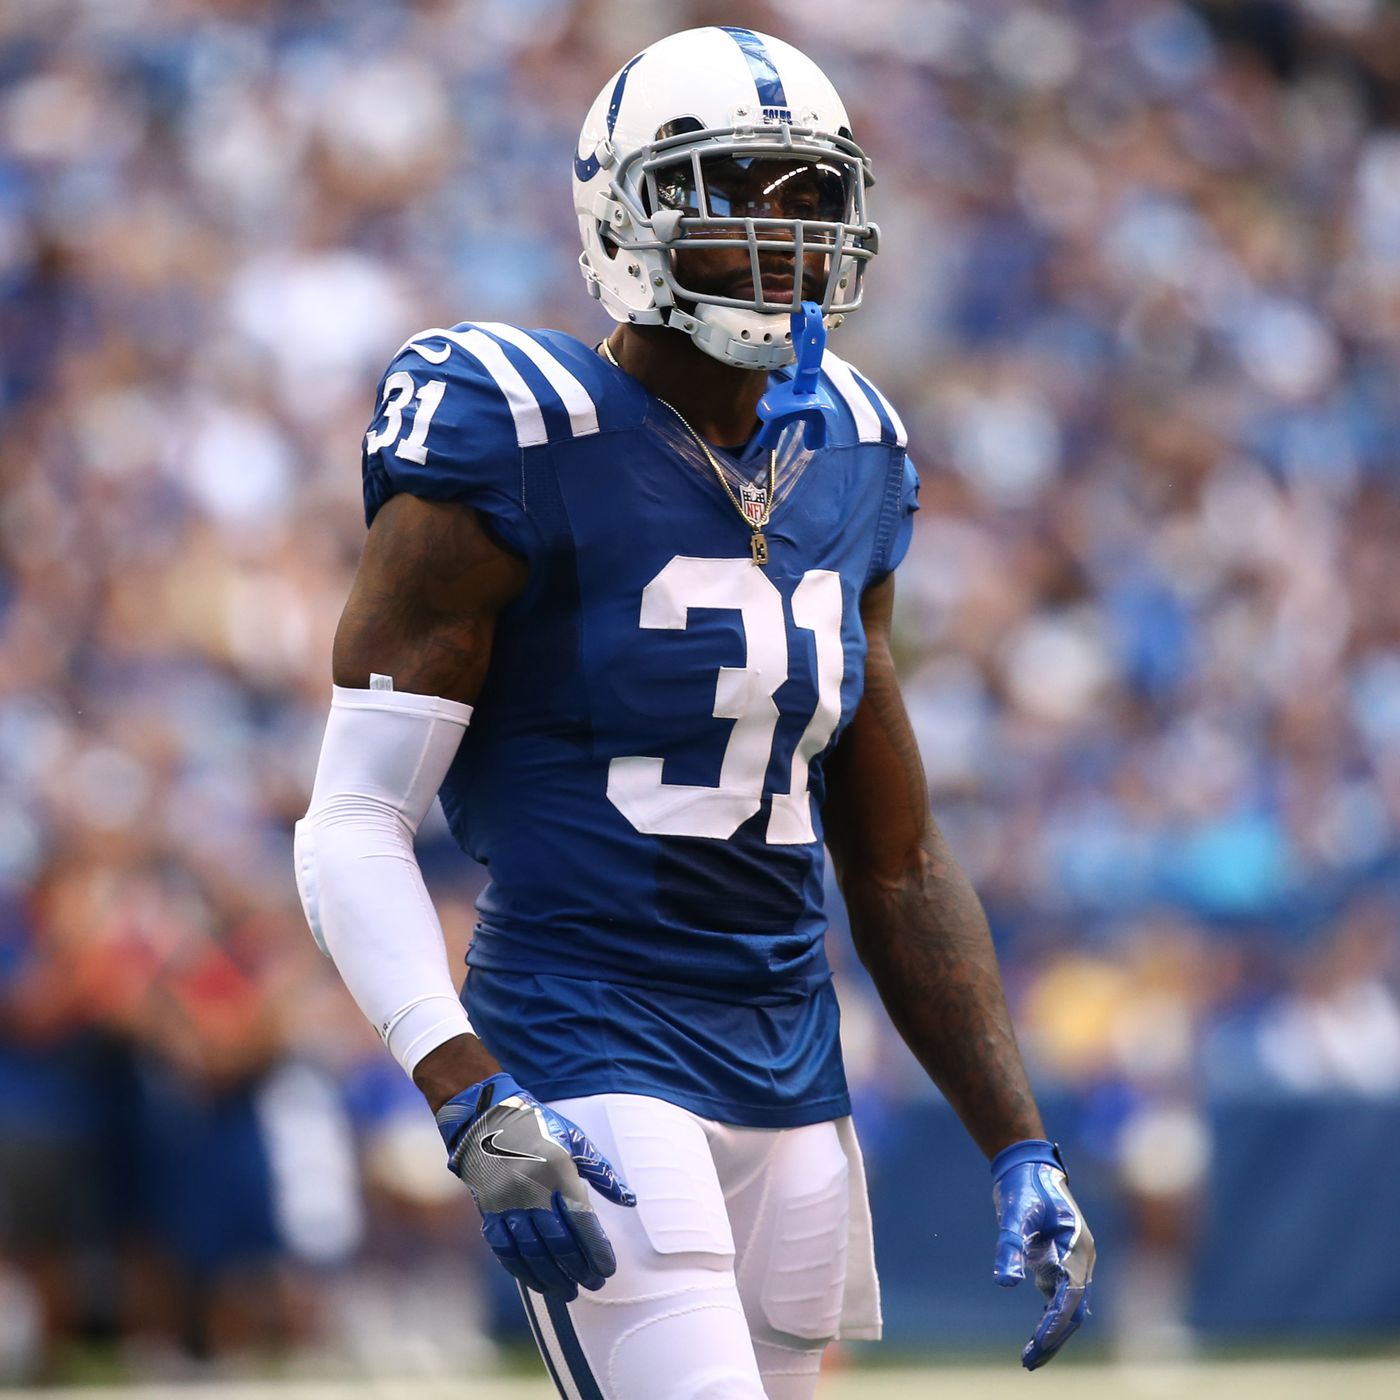 Antonio Cromartie S Wife Claims The Colts Cut Her Husband Because